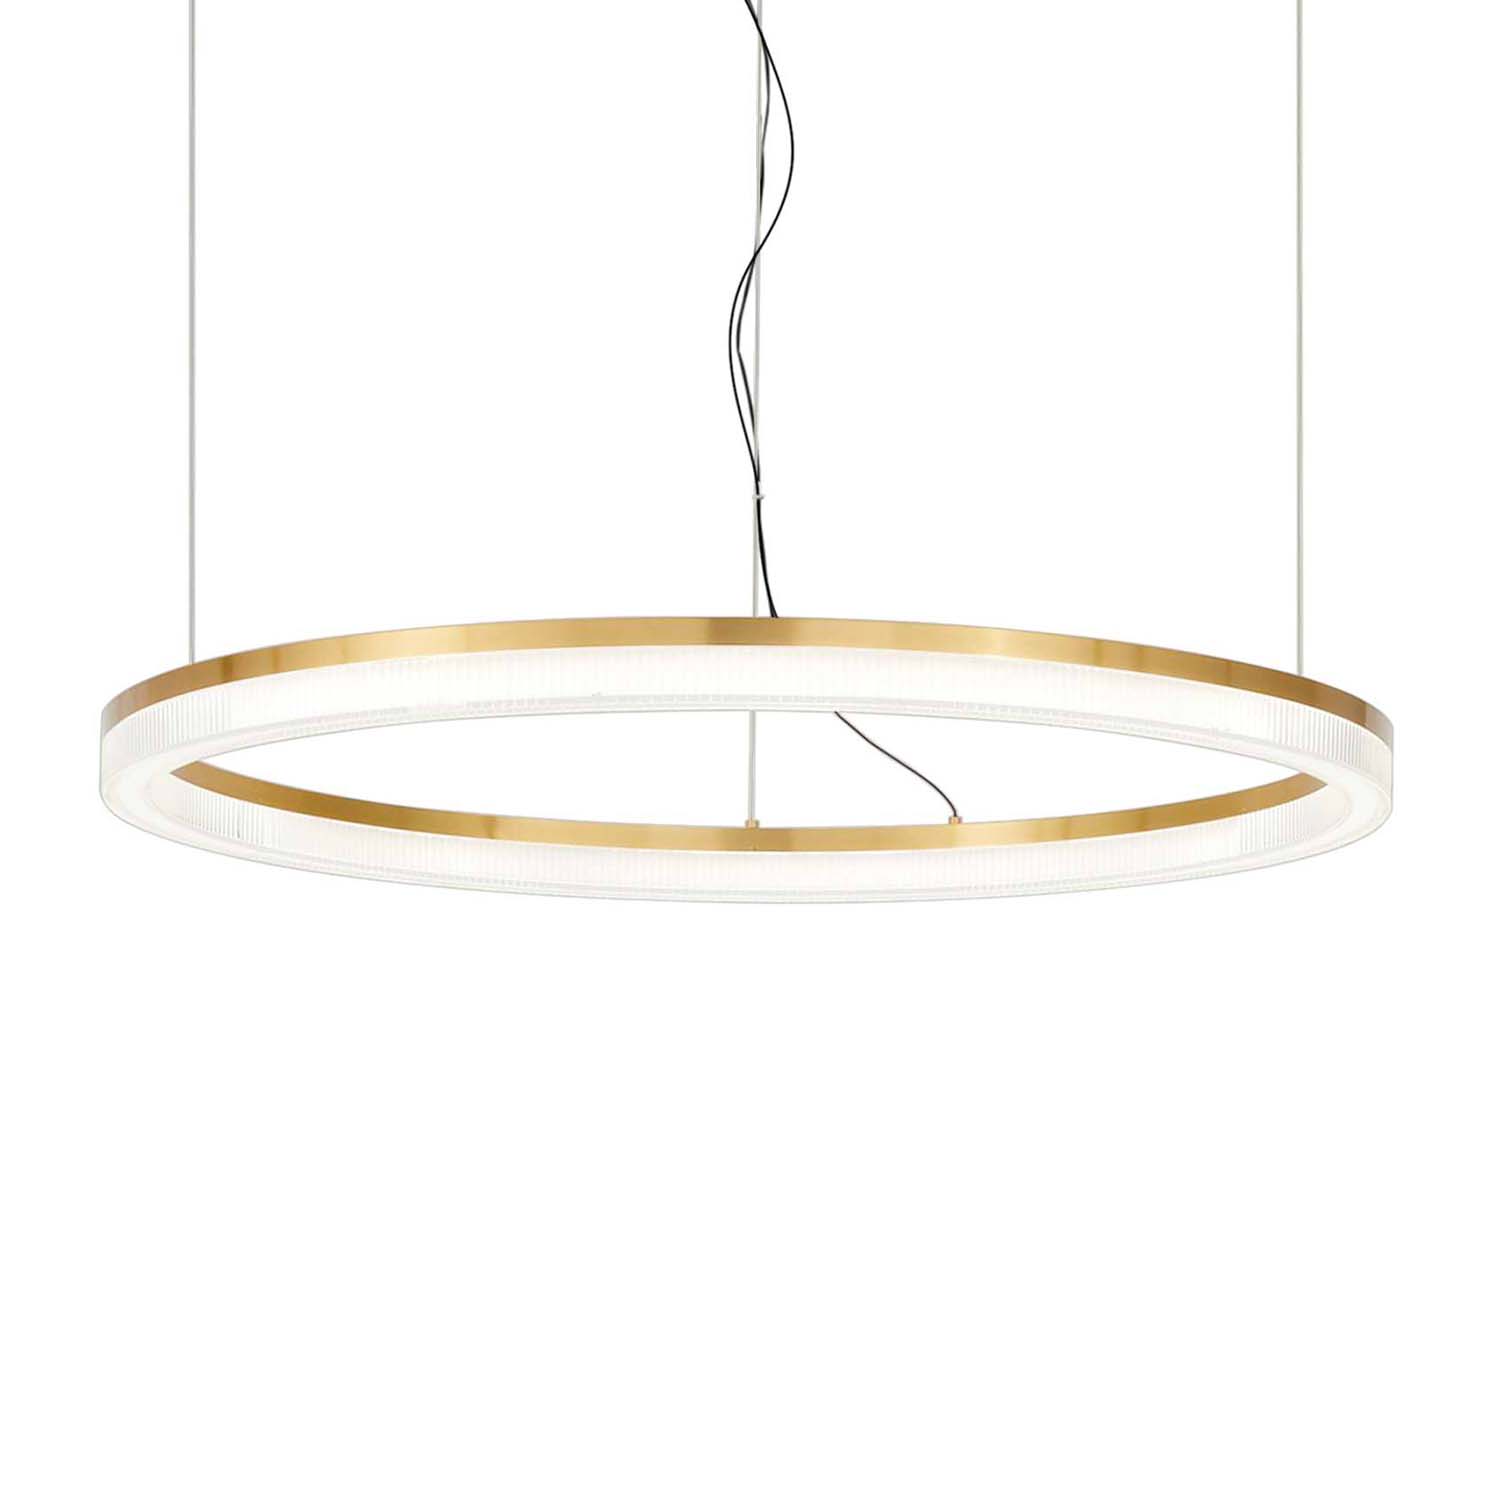 CROWN - Luxurious and chic gold ring pendant light